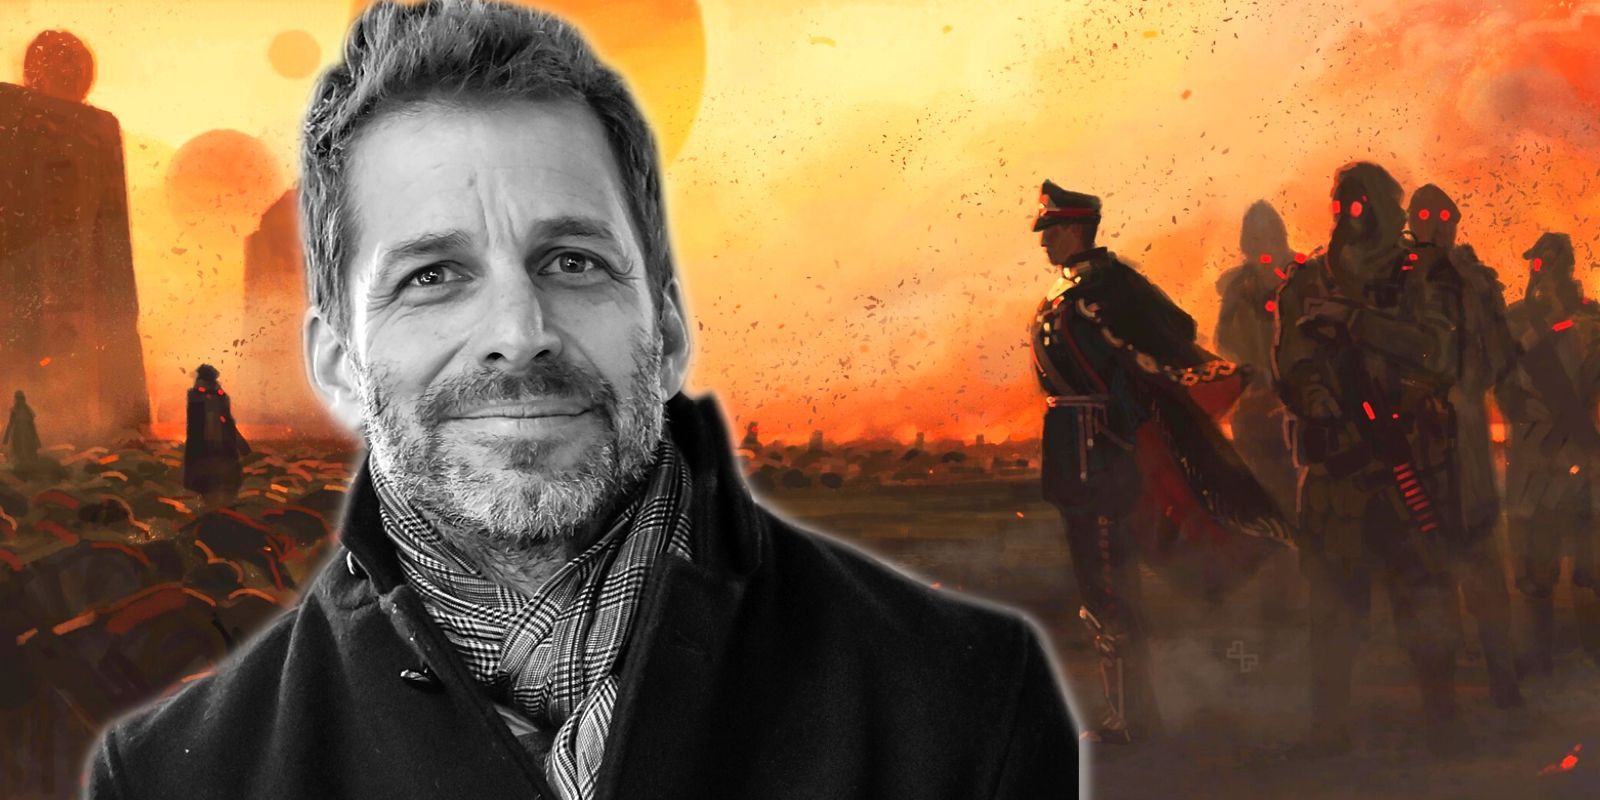 Zack Snyder next to Rebel Moon's tyrannical soldiers